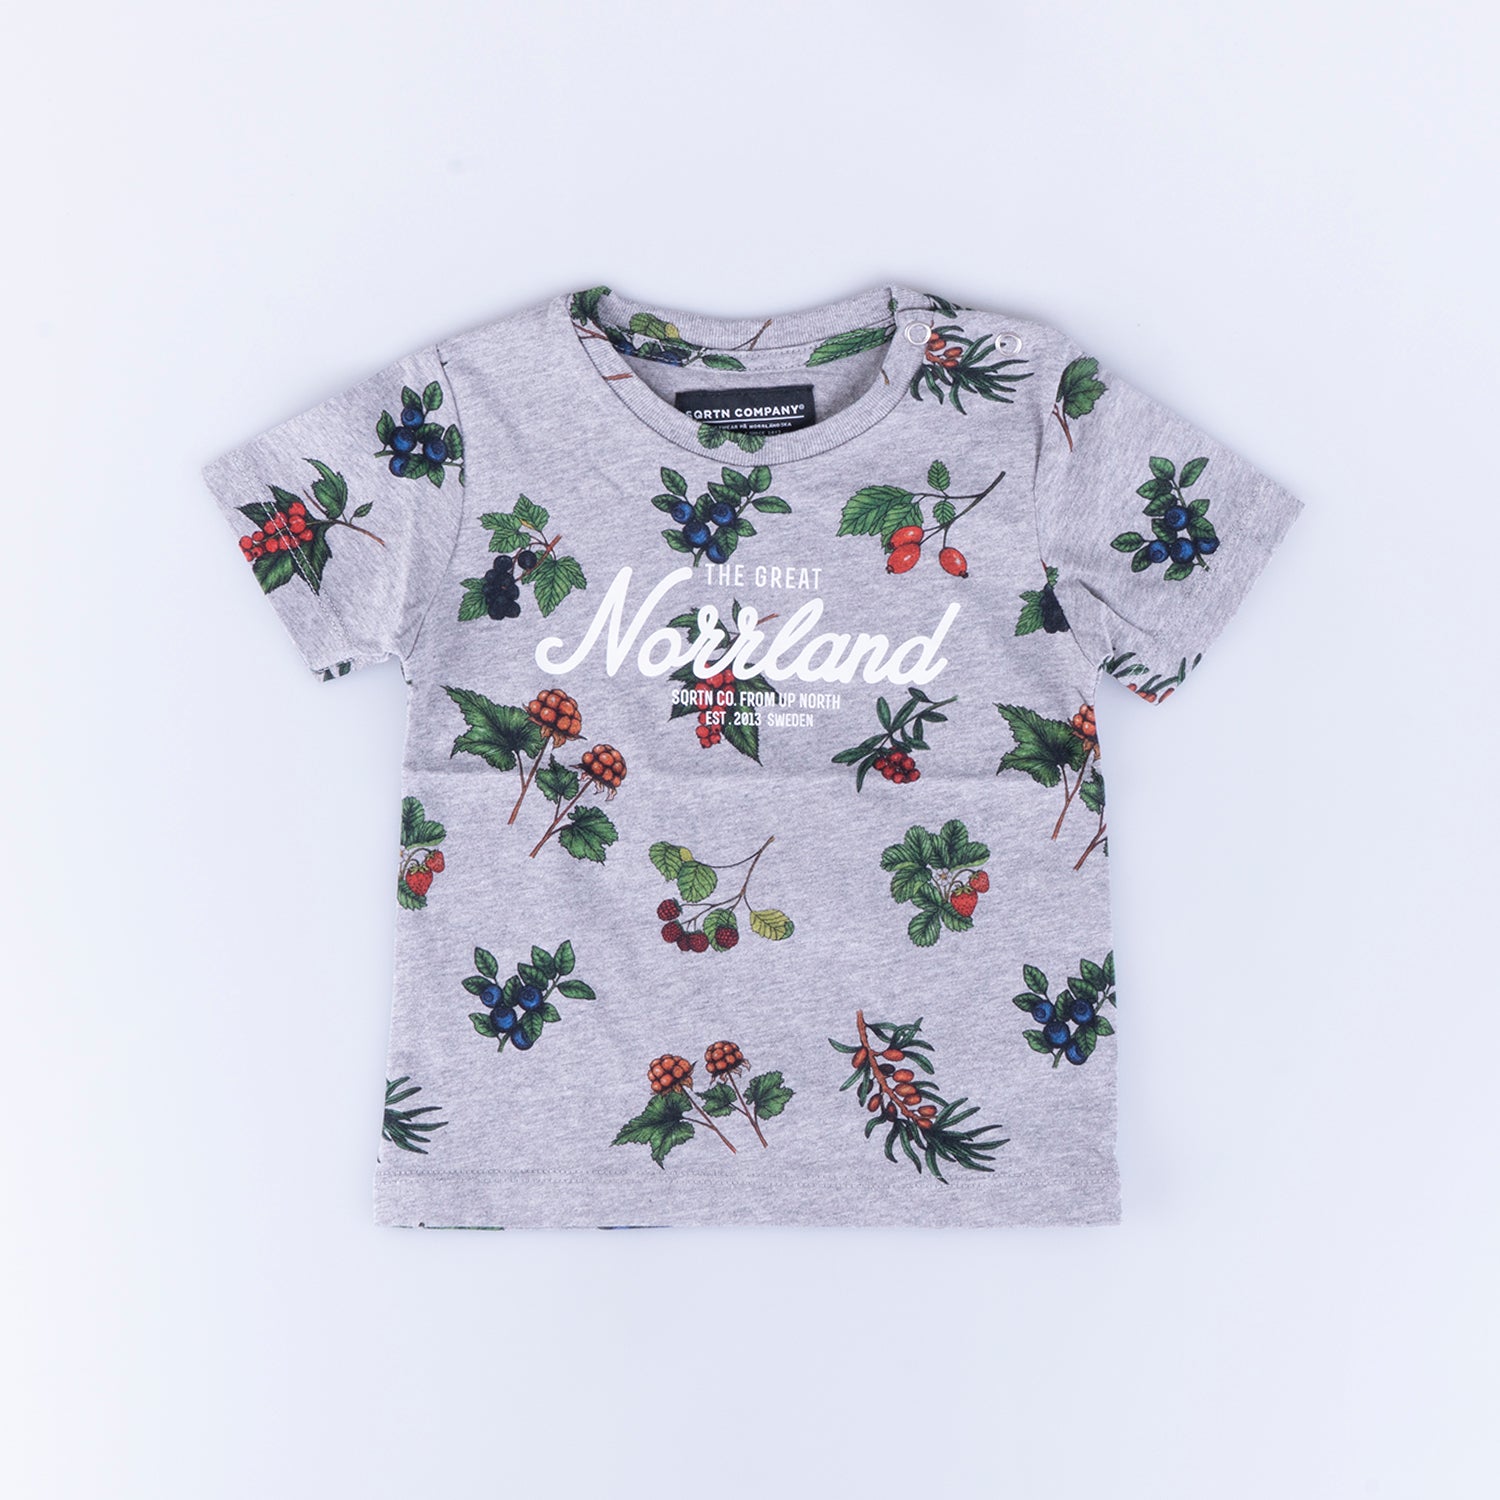 GREAT NORRLAND KIDS T-SHIRT - BERRY GREY